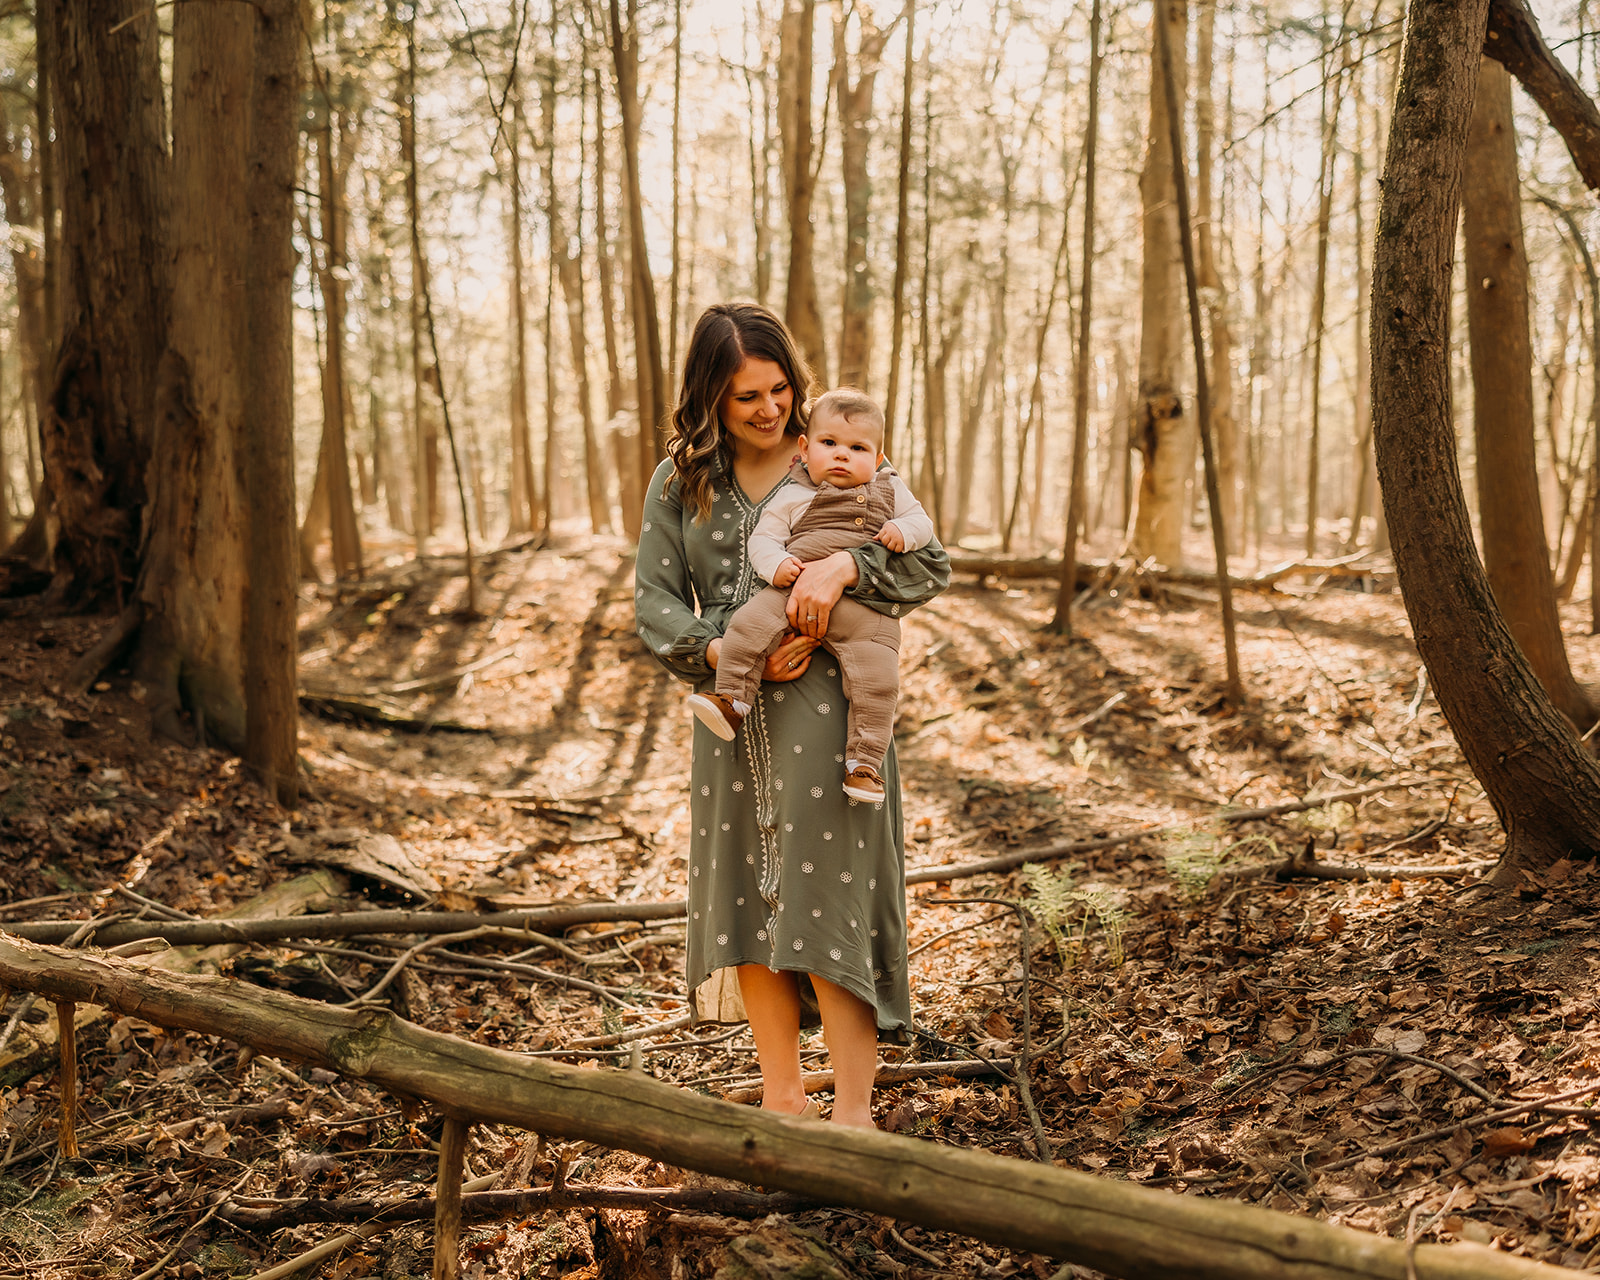 Loving mother and child capturing memories in a forest photoshoot